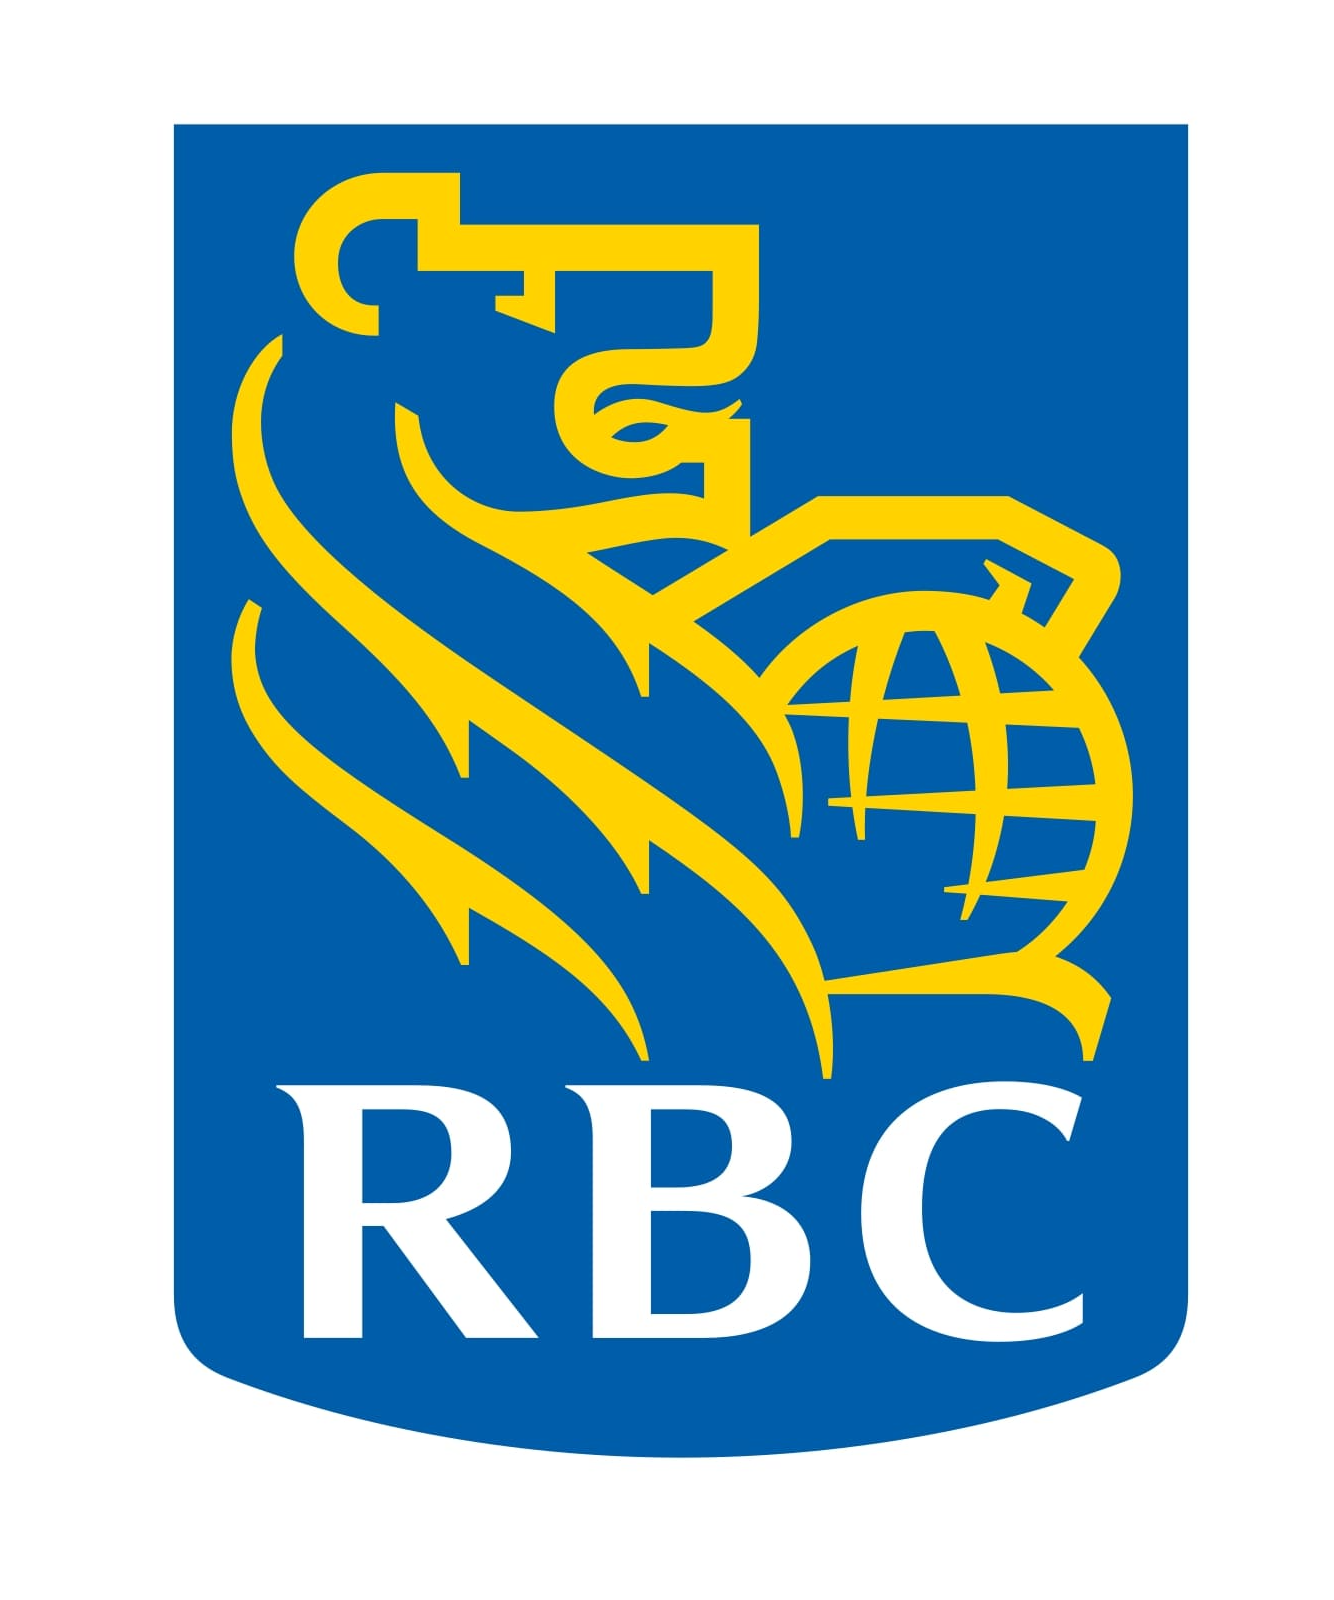 DLC committee on behalf of RBC Investor Services